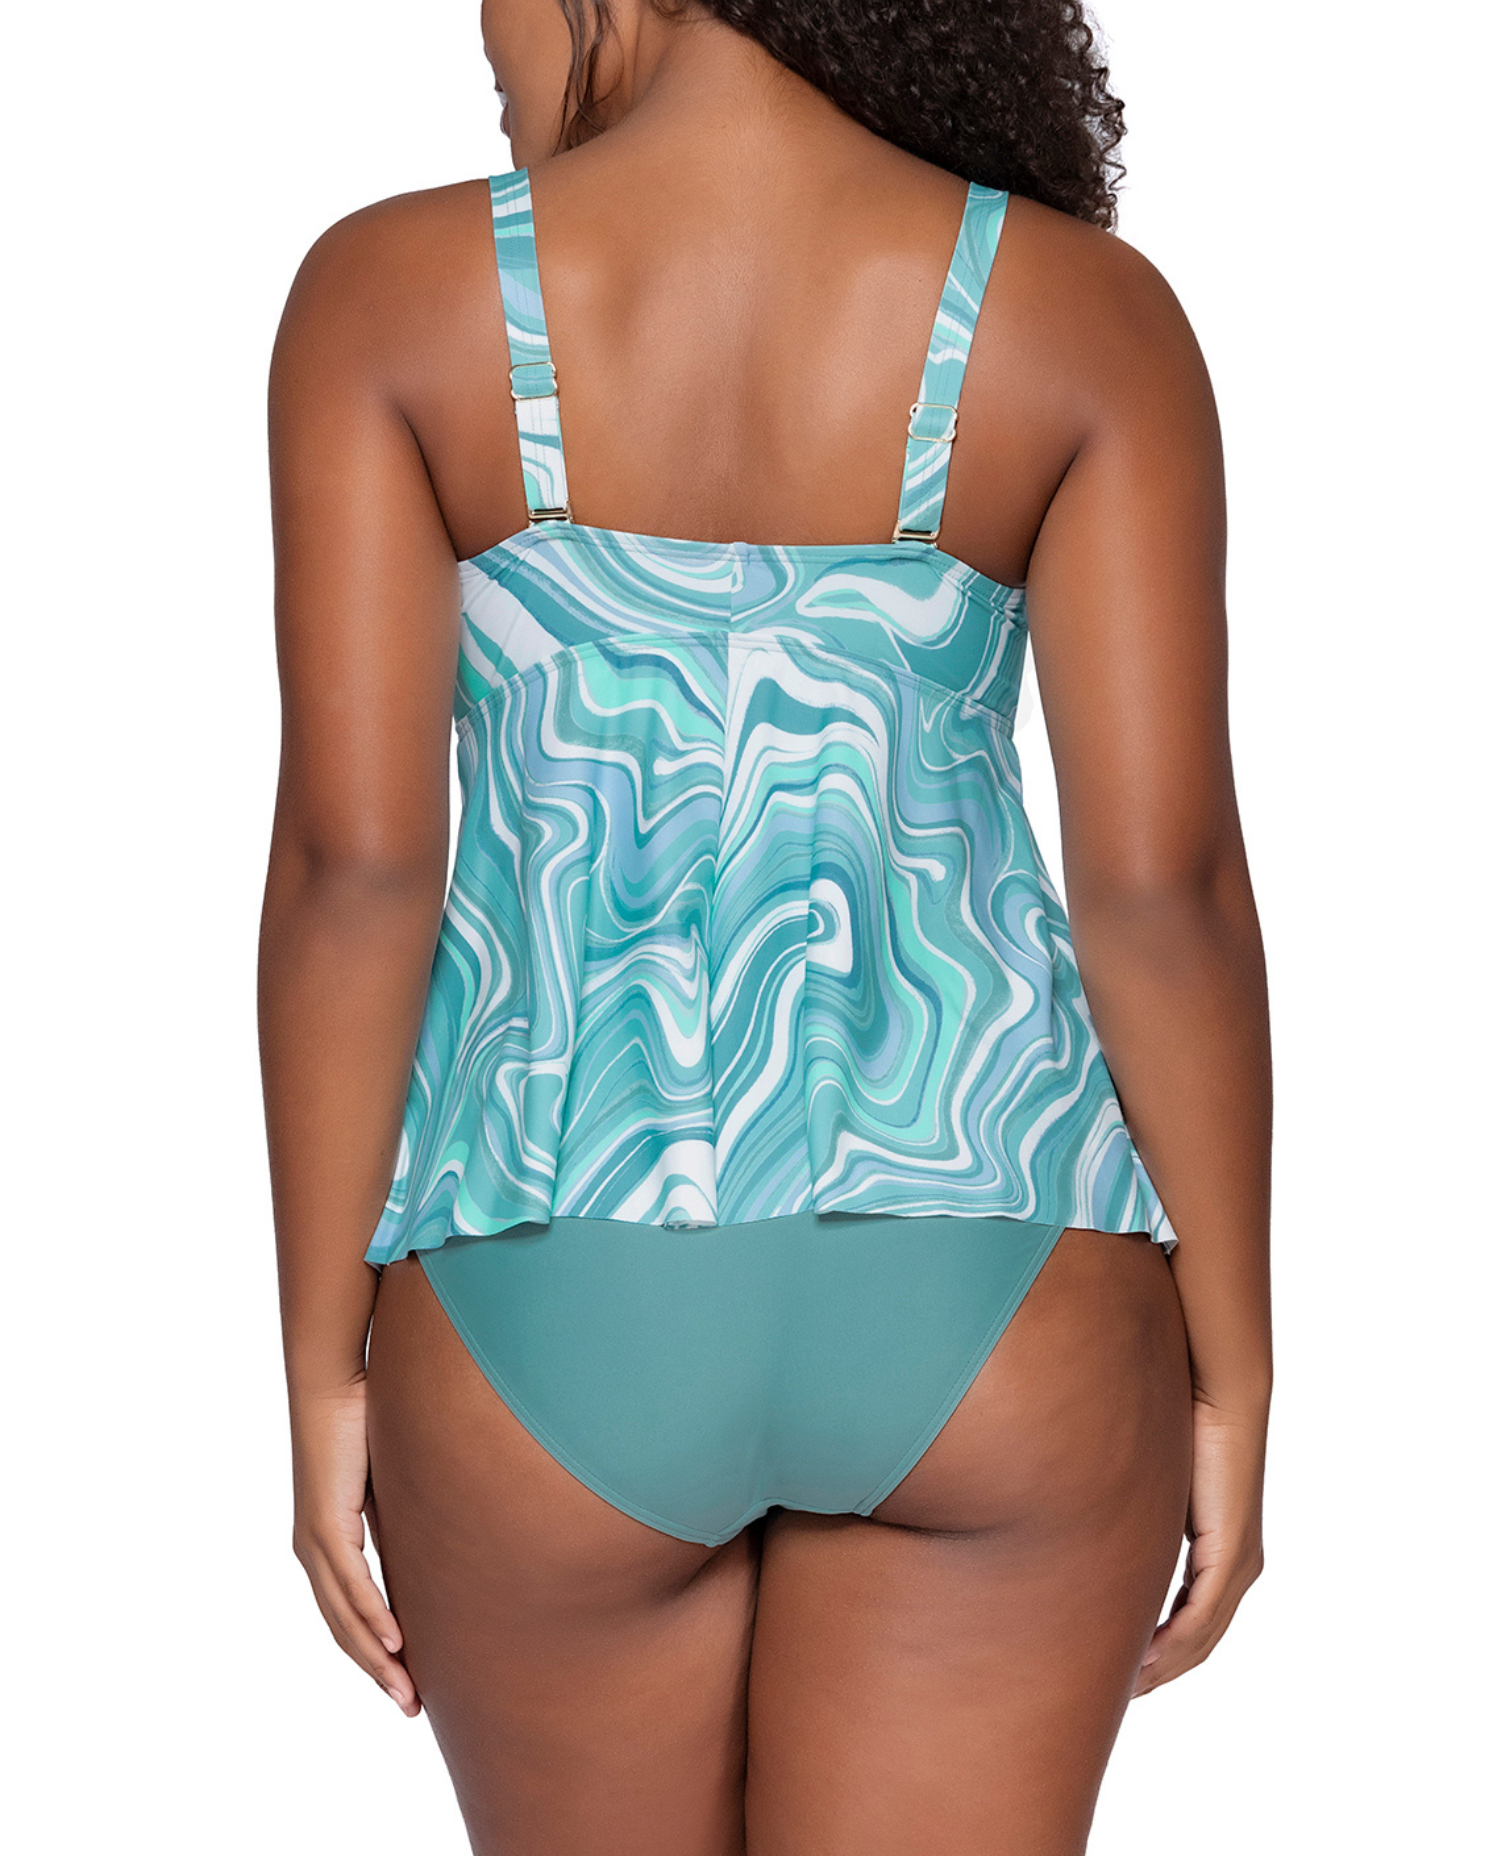 Model wearing a babydoll style tankini with hidden underwire in a pale turquoise and white swirl print 